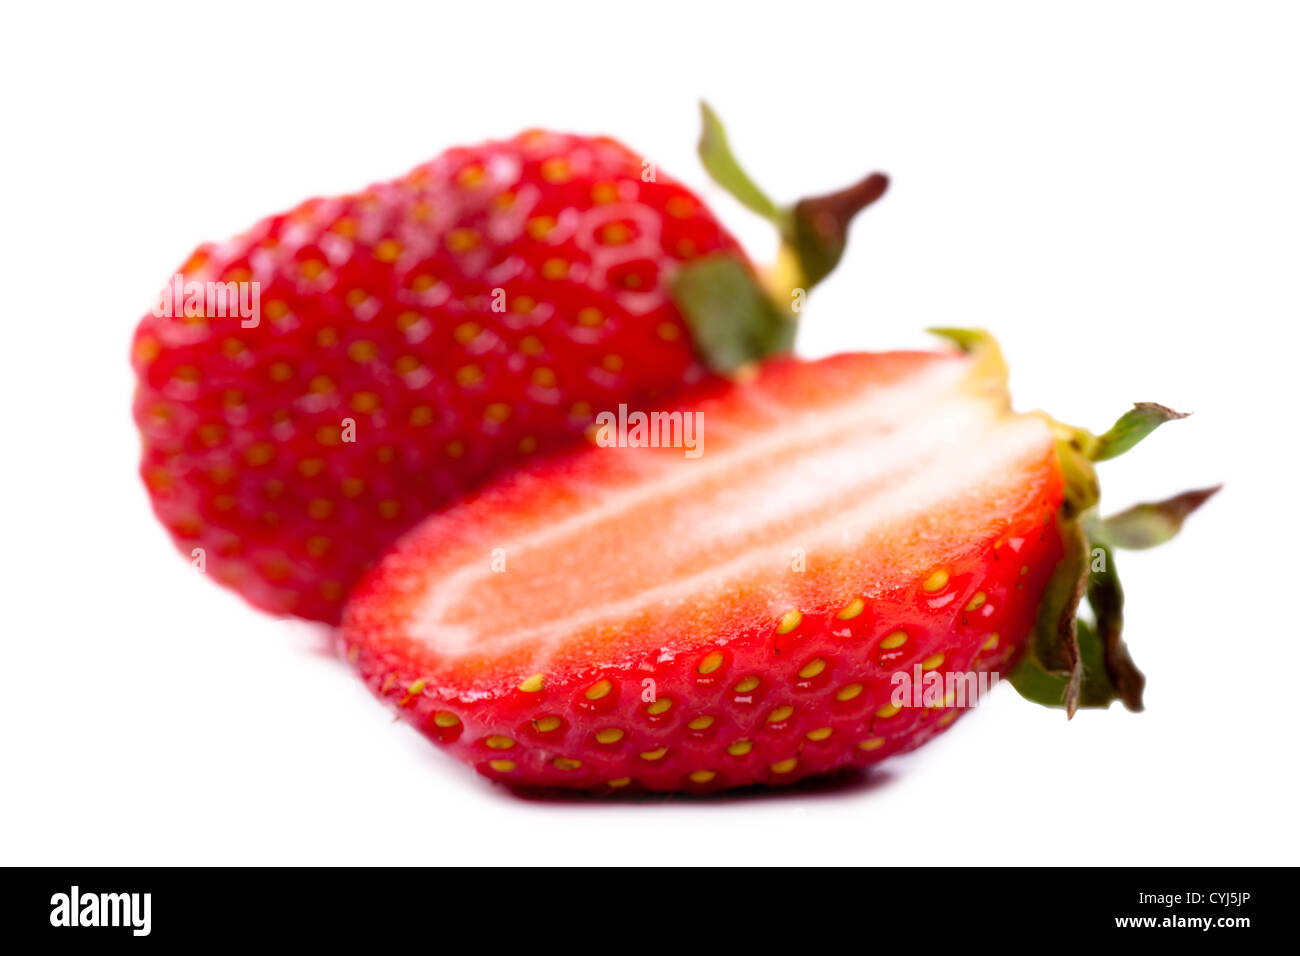 Macro view of a fresh strawberry over white background Stock Photo